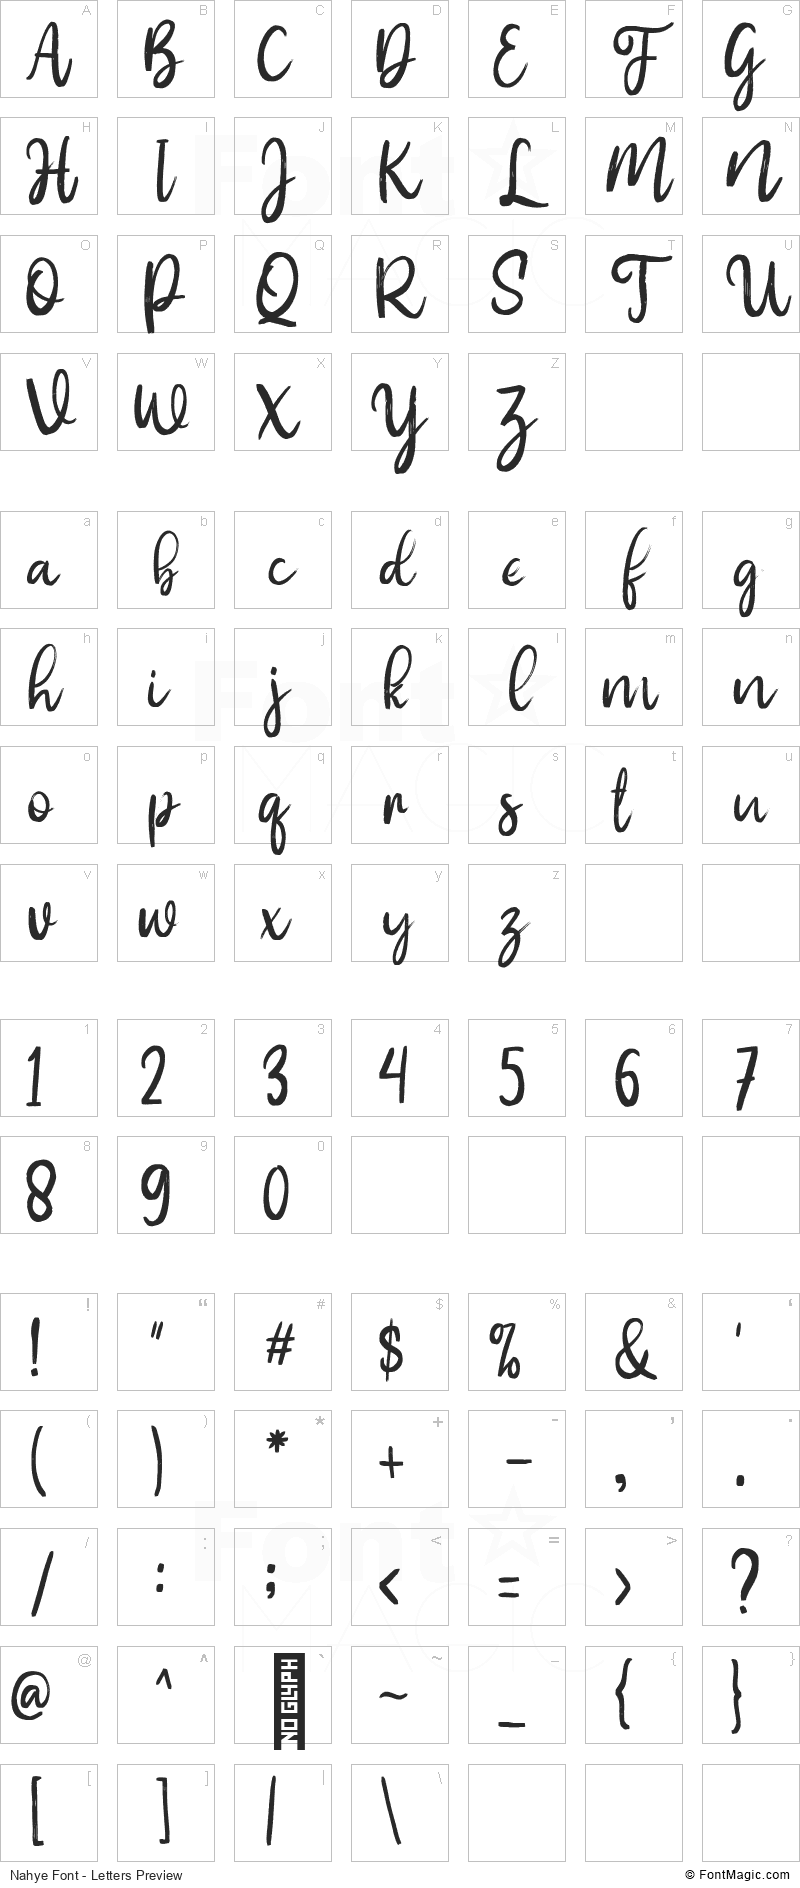 Nahye Font - All Latters Preview Chart